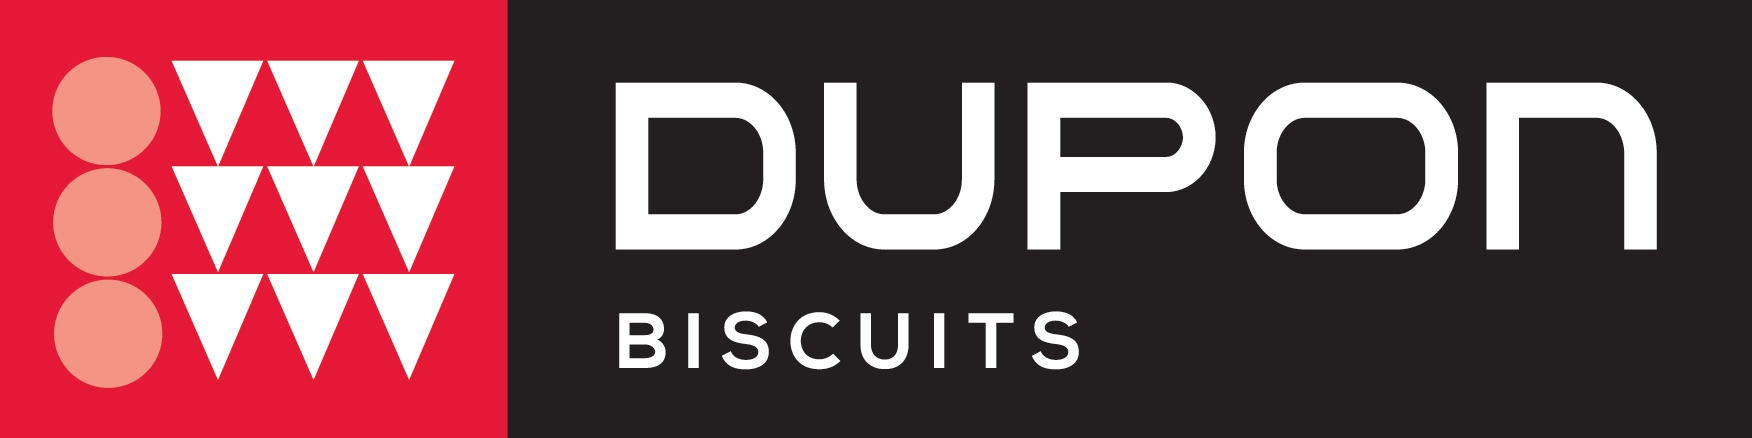 Dupon Biscuits